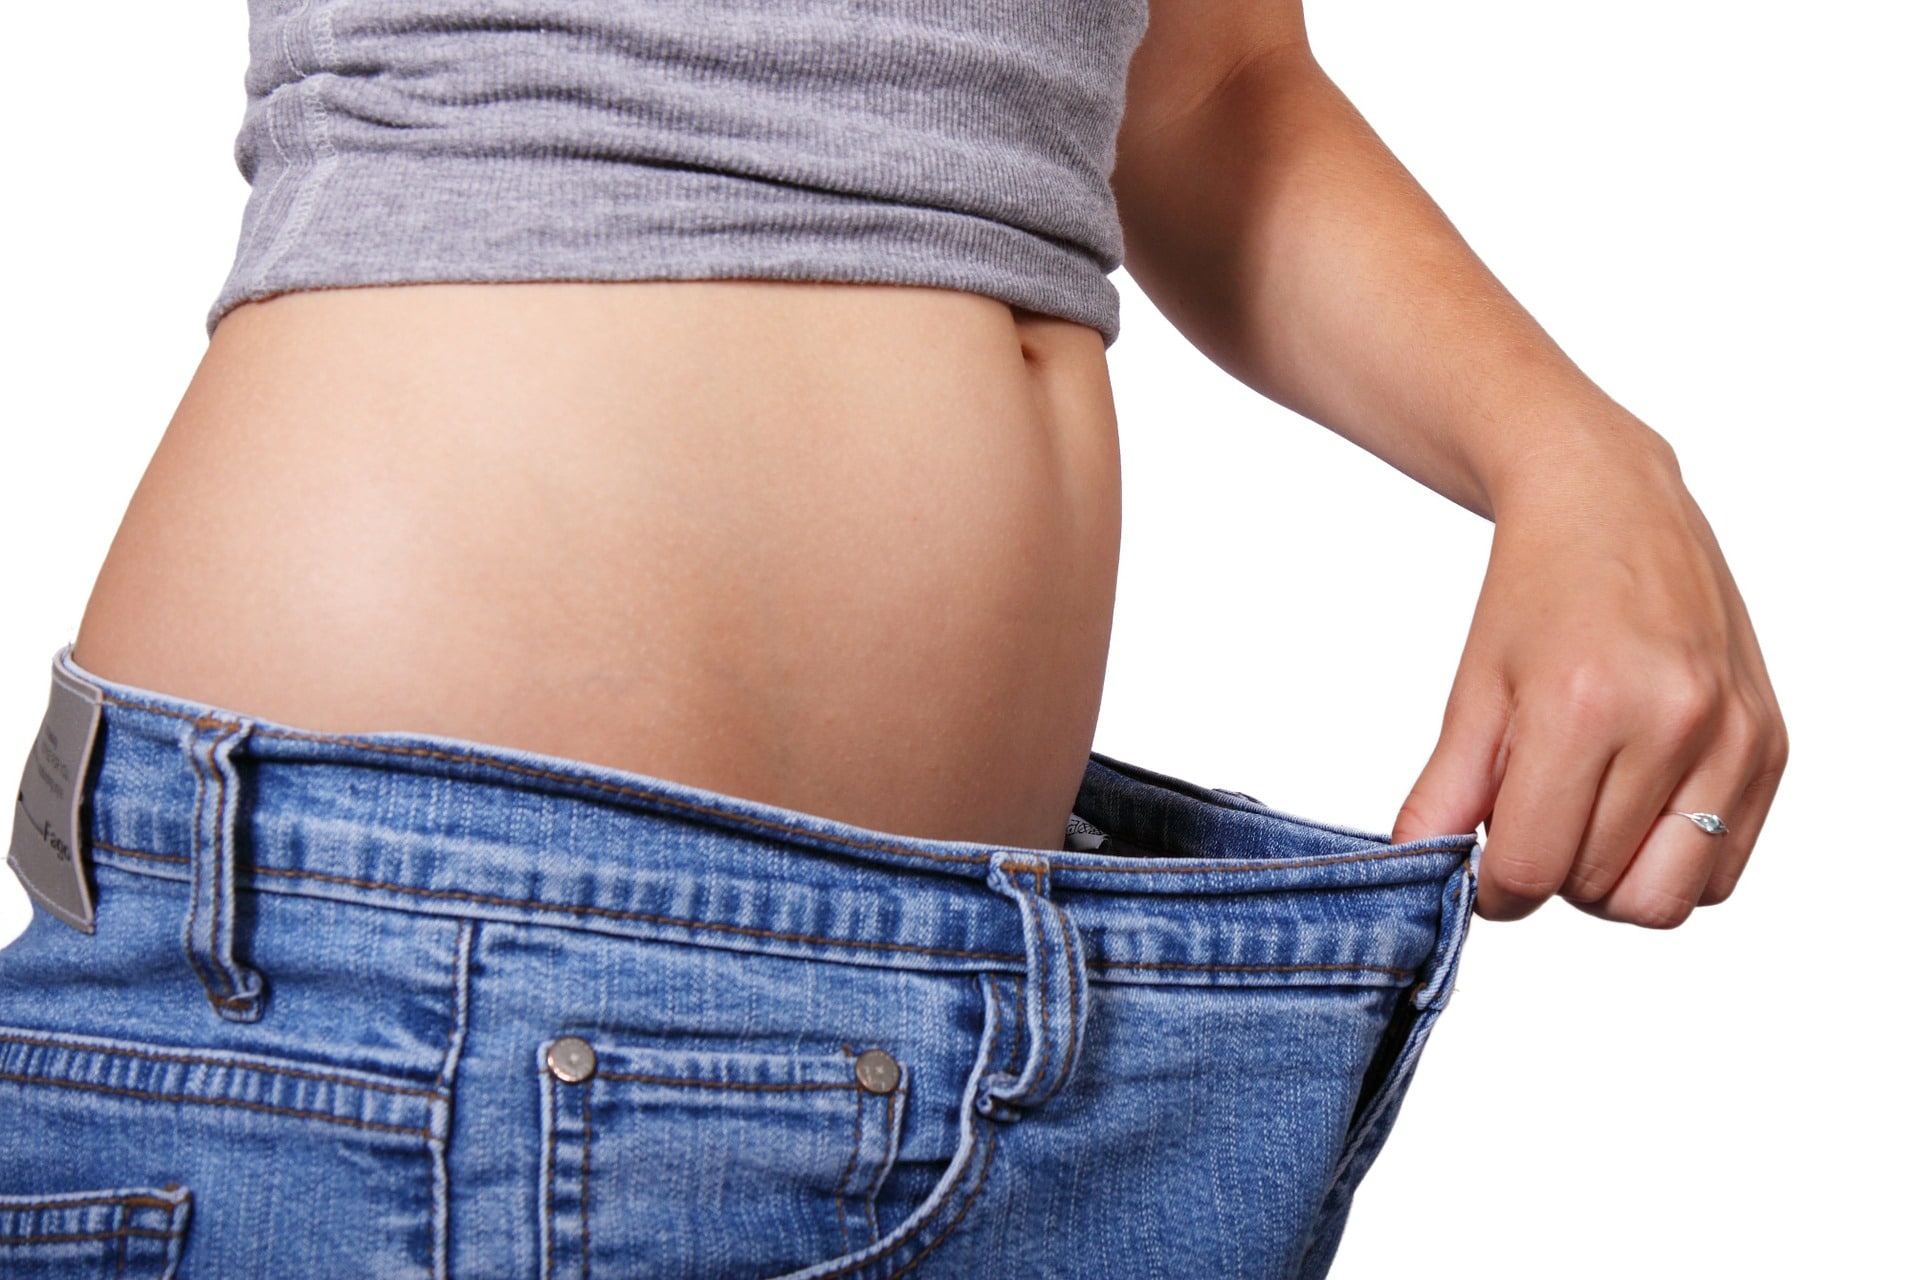 3 Things To Consider Before Getting Liposuction